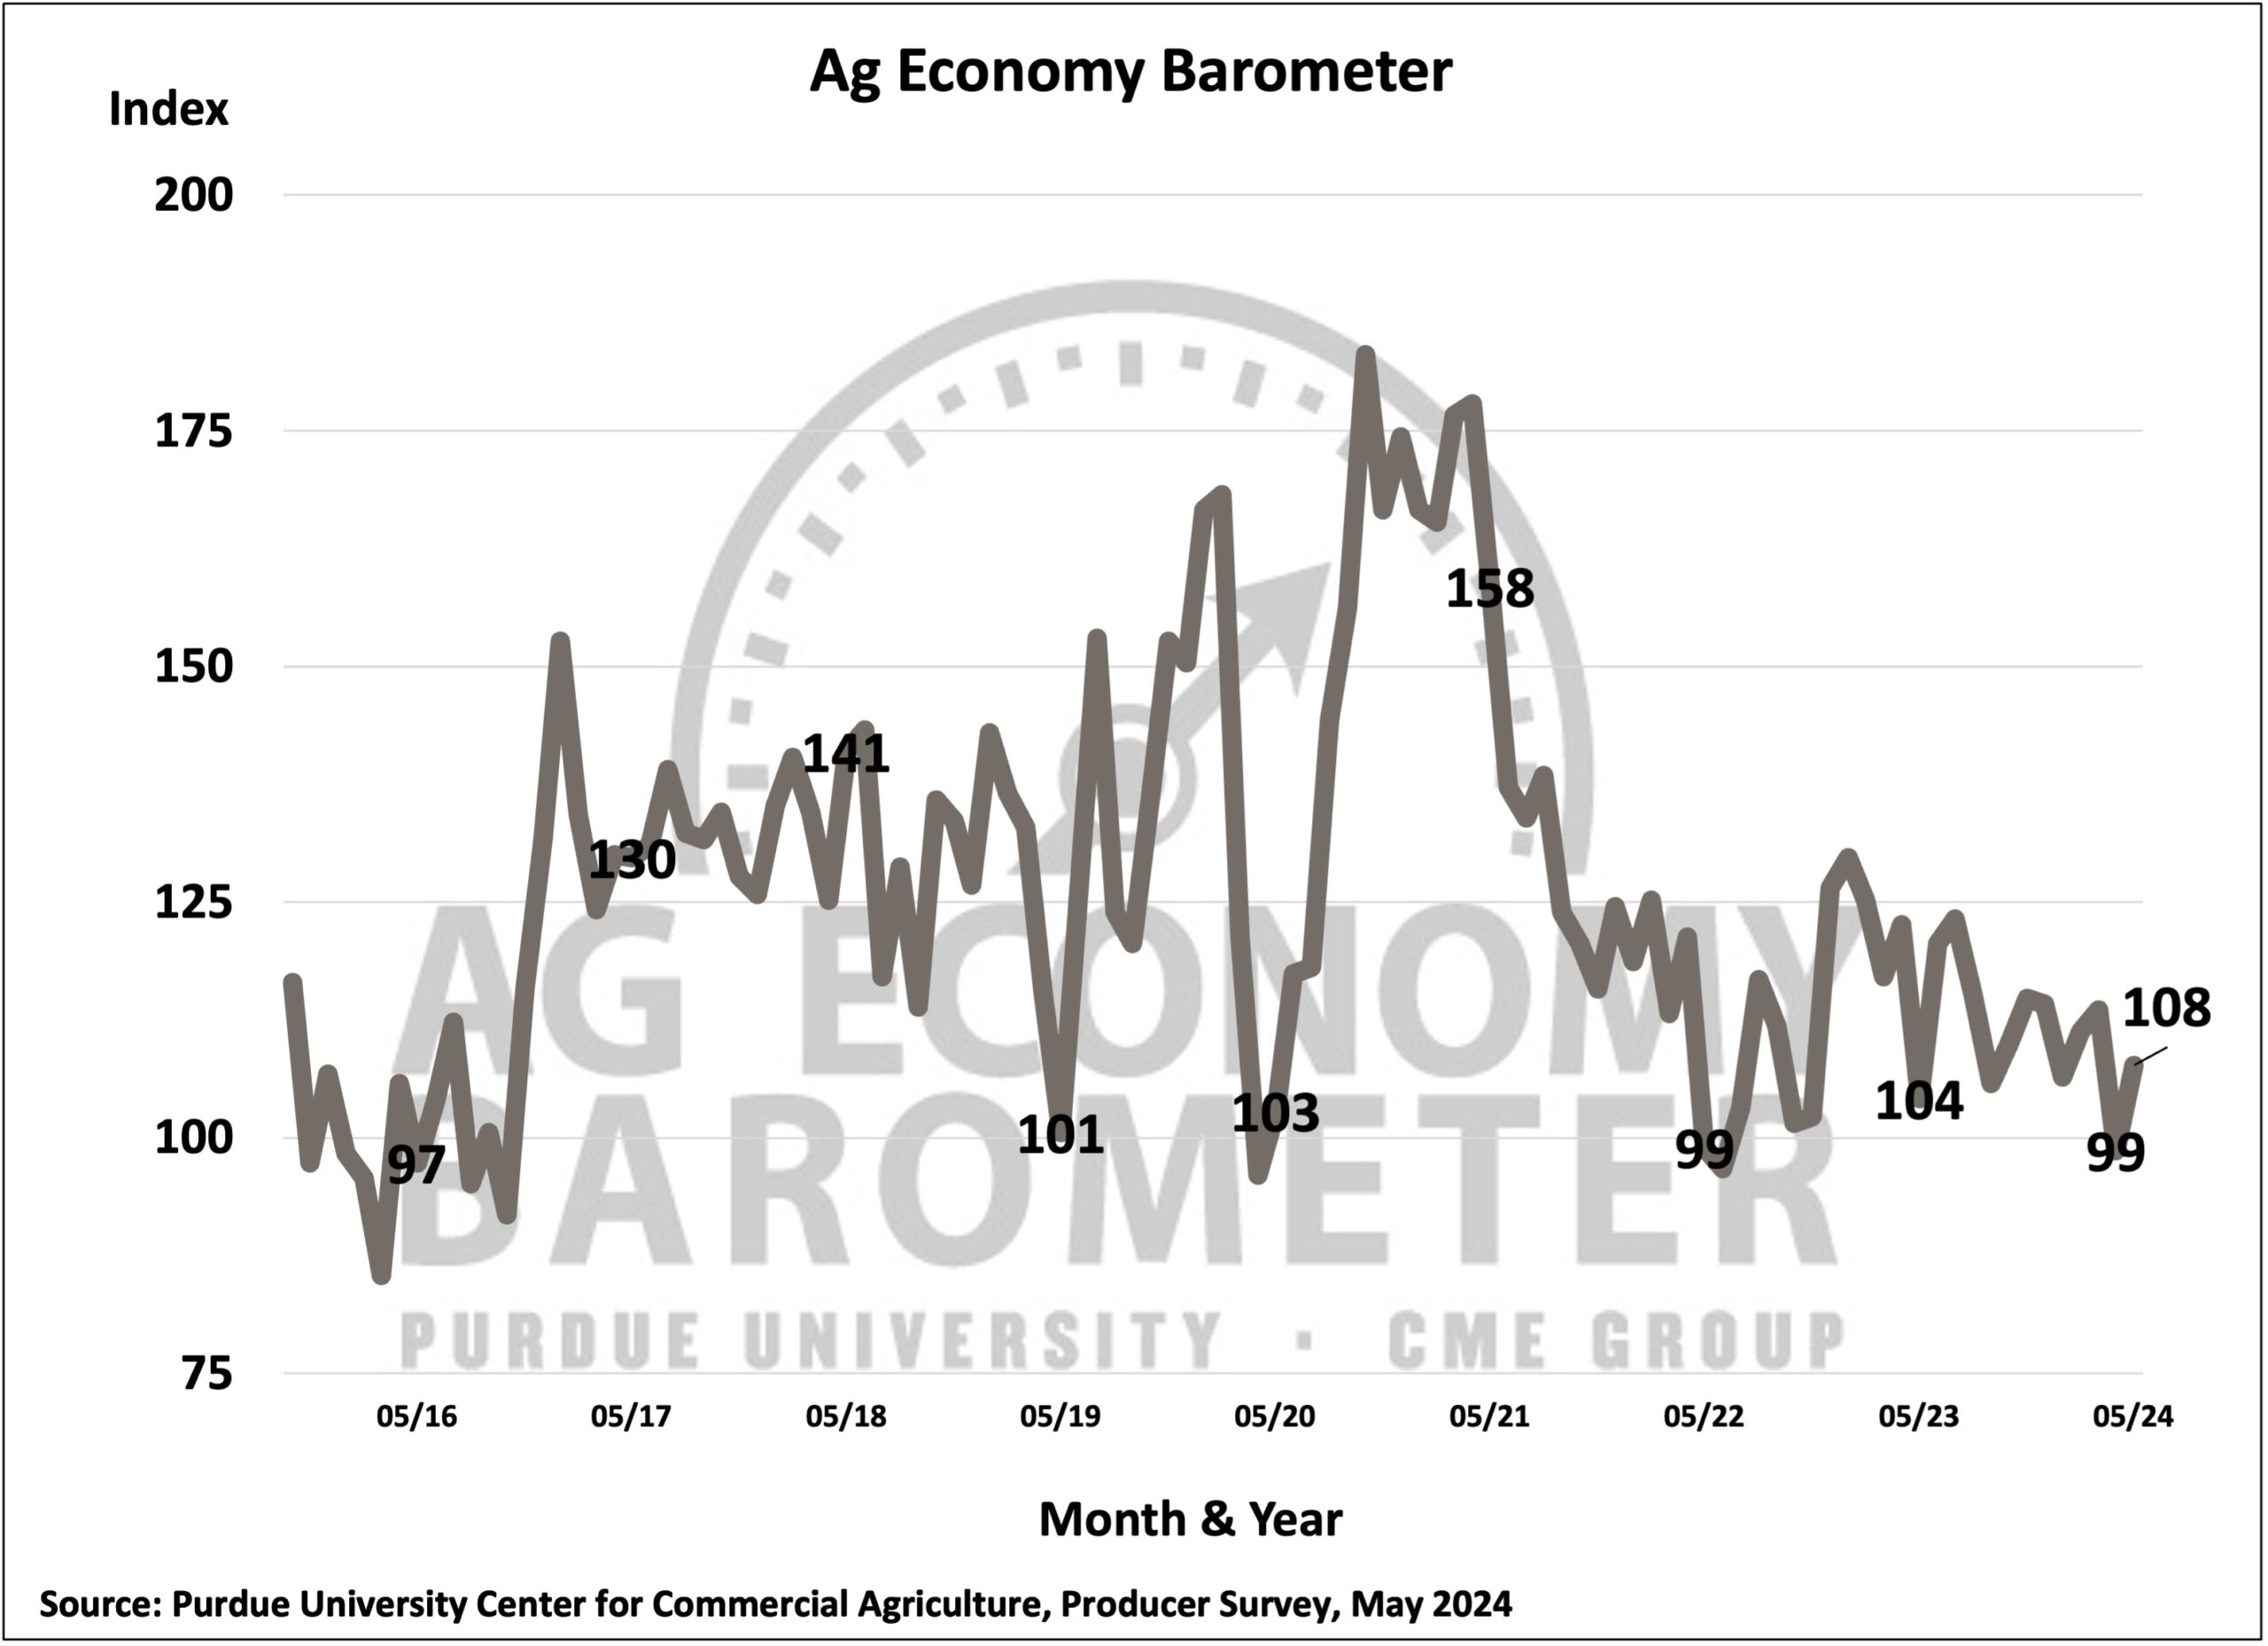 Figure 1. Purdue/CME Group Ag Economy Barometer, October 2015-May 2024.